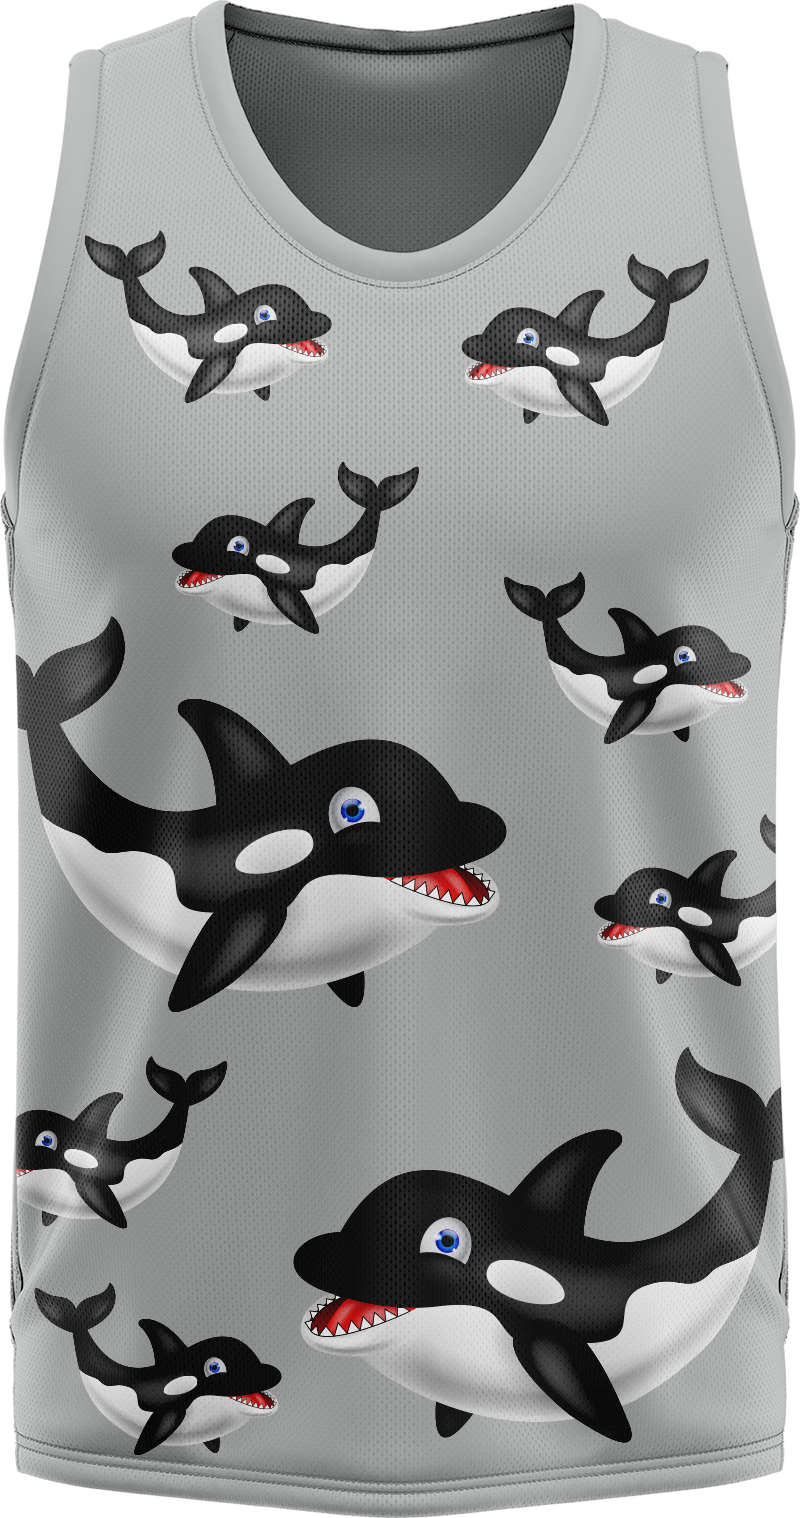 Orca Whale Basketball Jersey